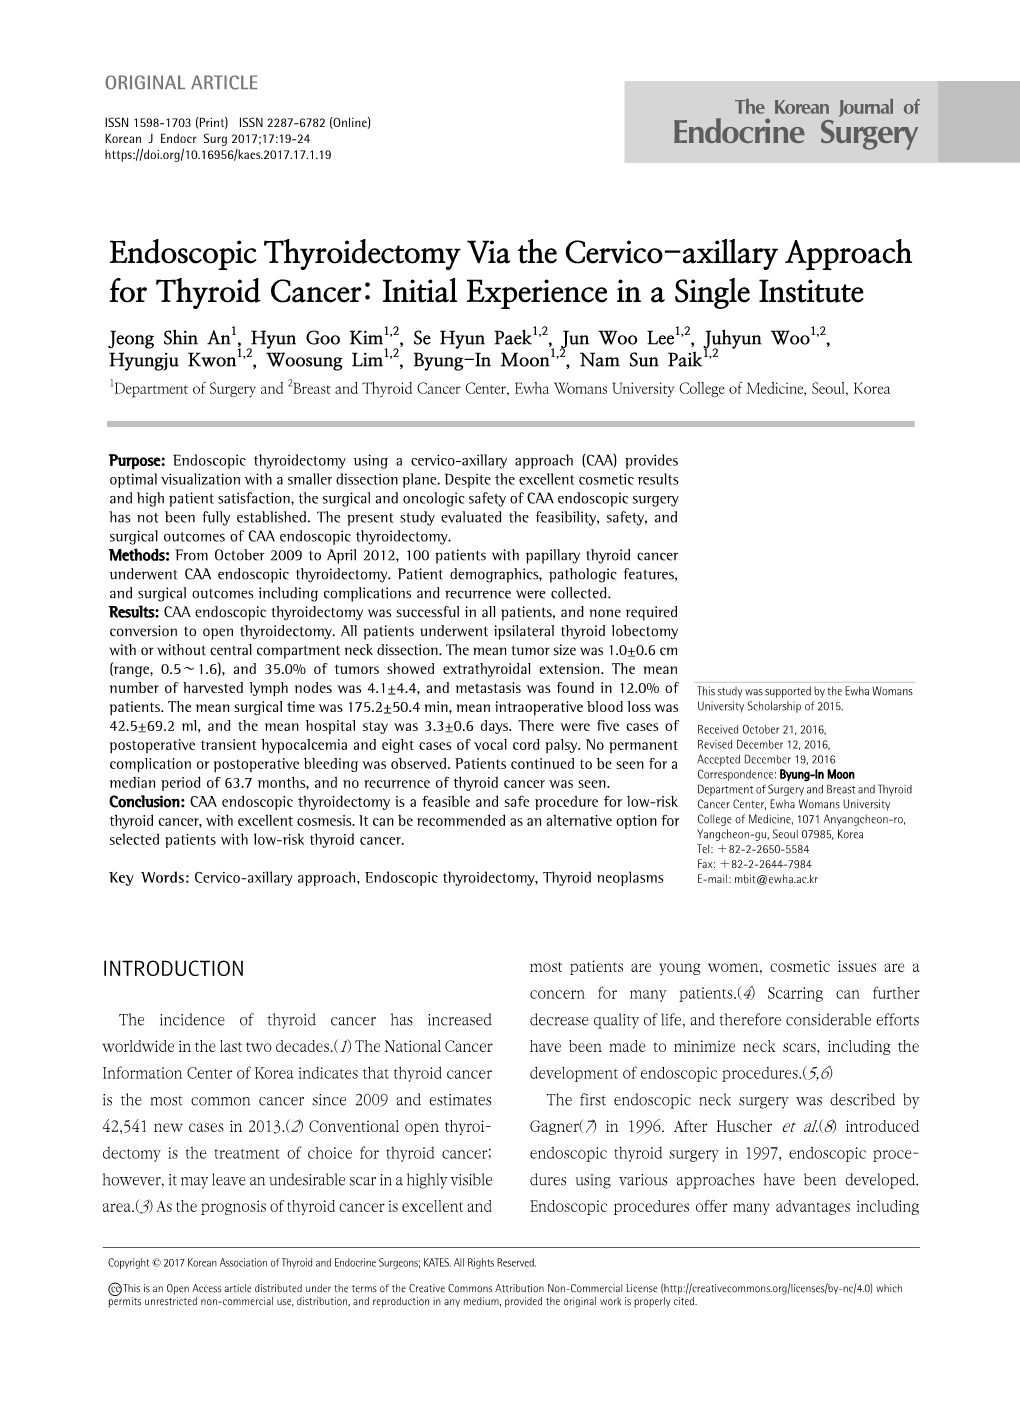 Endoscopic Thyroidectomy Via the Cervico-Axillary Approach for Thyroid Cancer: Initial Experience in a Single Institute